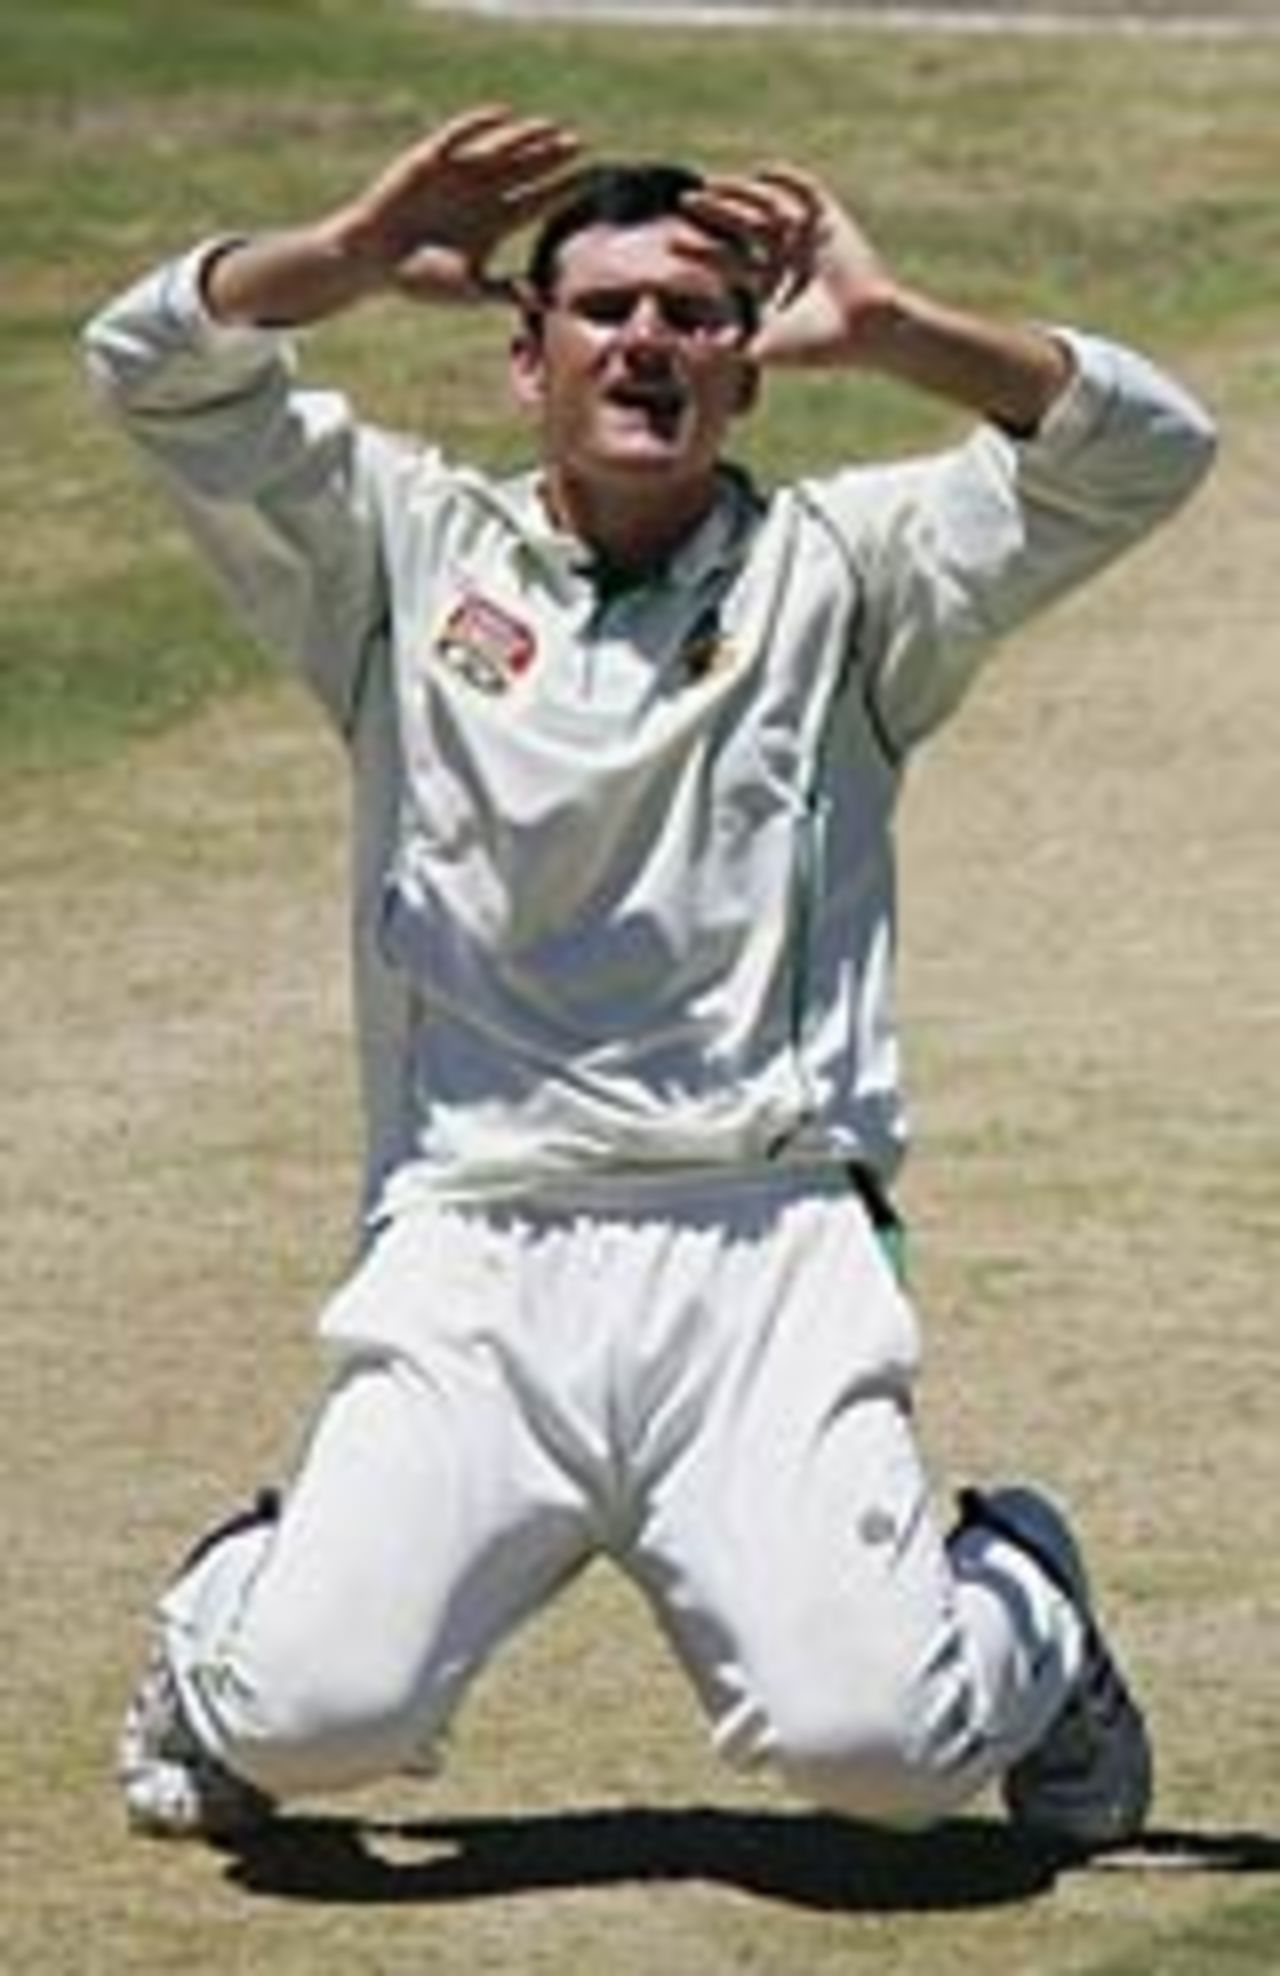 Graeme Smith down on his knees, South Africa v England, 5th Test, Centurion, January 24, 2005